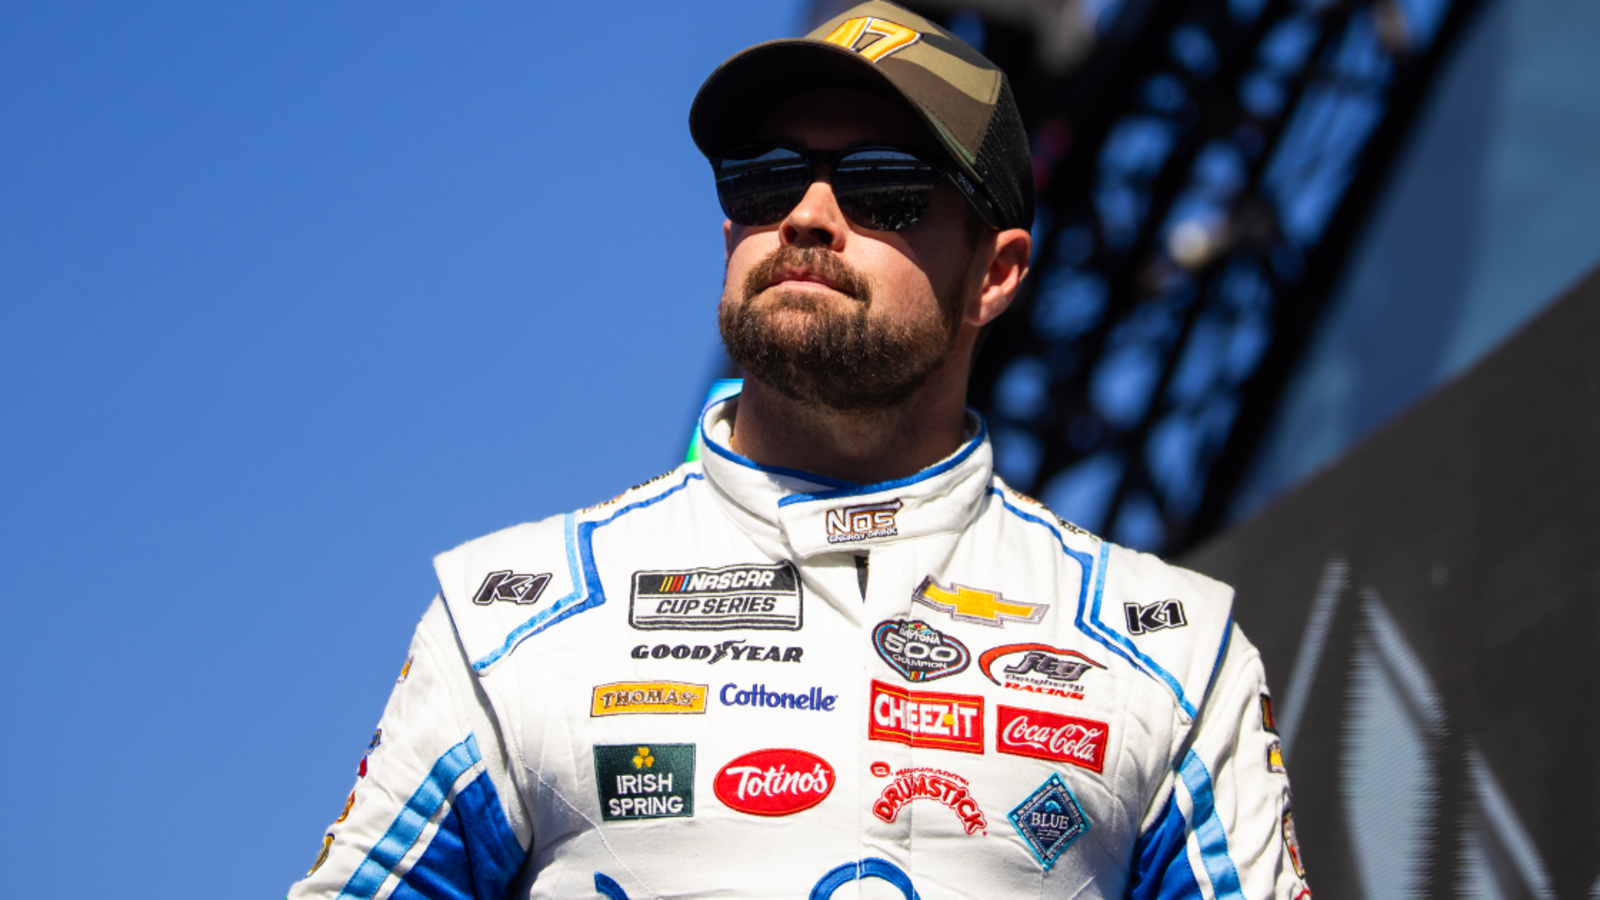 Ricky Stenhouse Jr. signs three-year extension with JTG Daugherty Racing